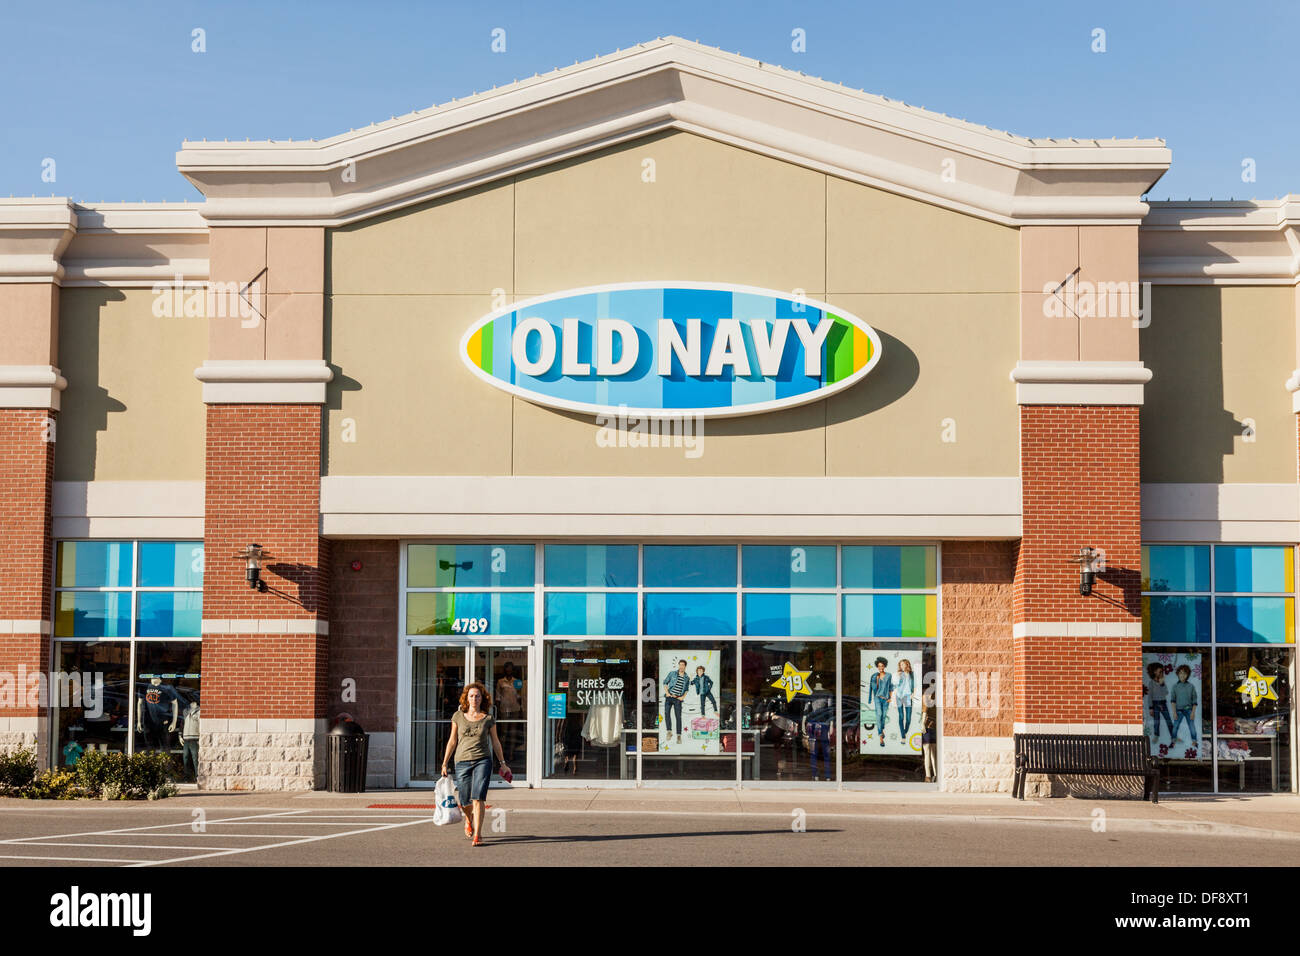 Old Navy, clothing retailer, box store, this one in Utica, New York State Stock Photo